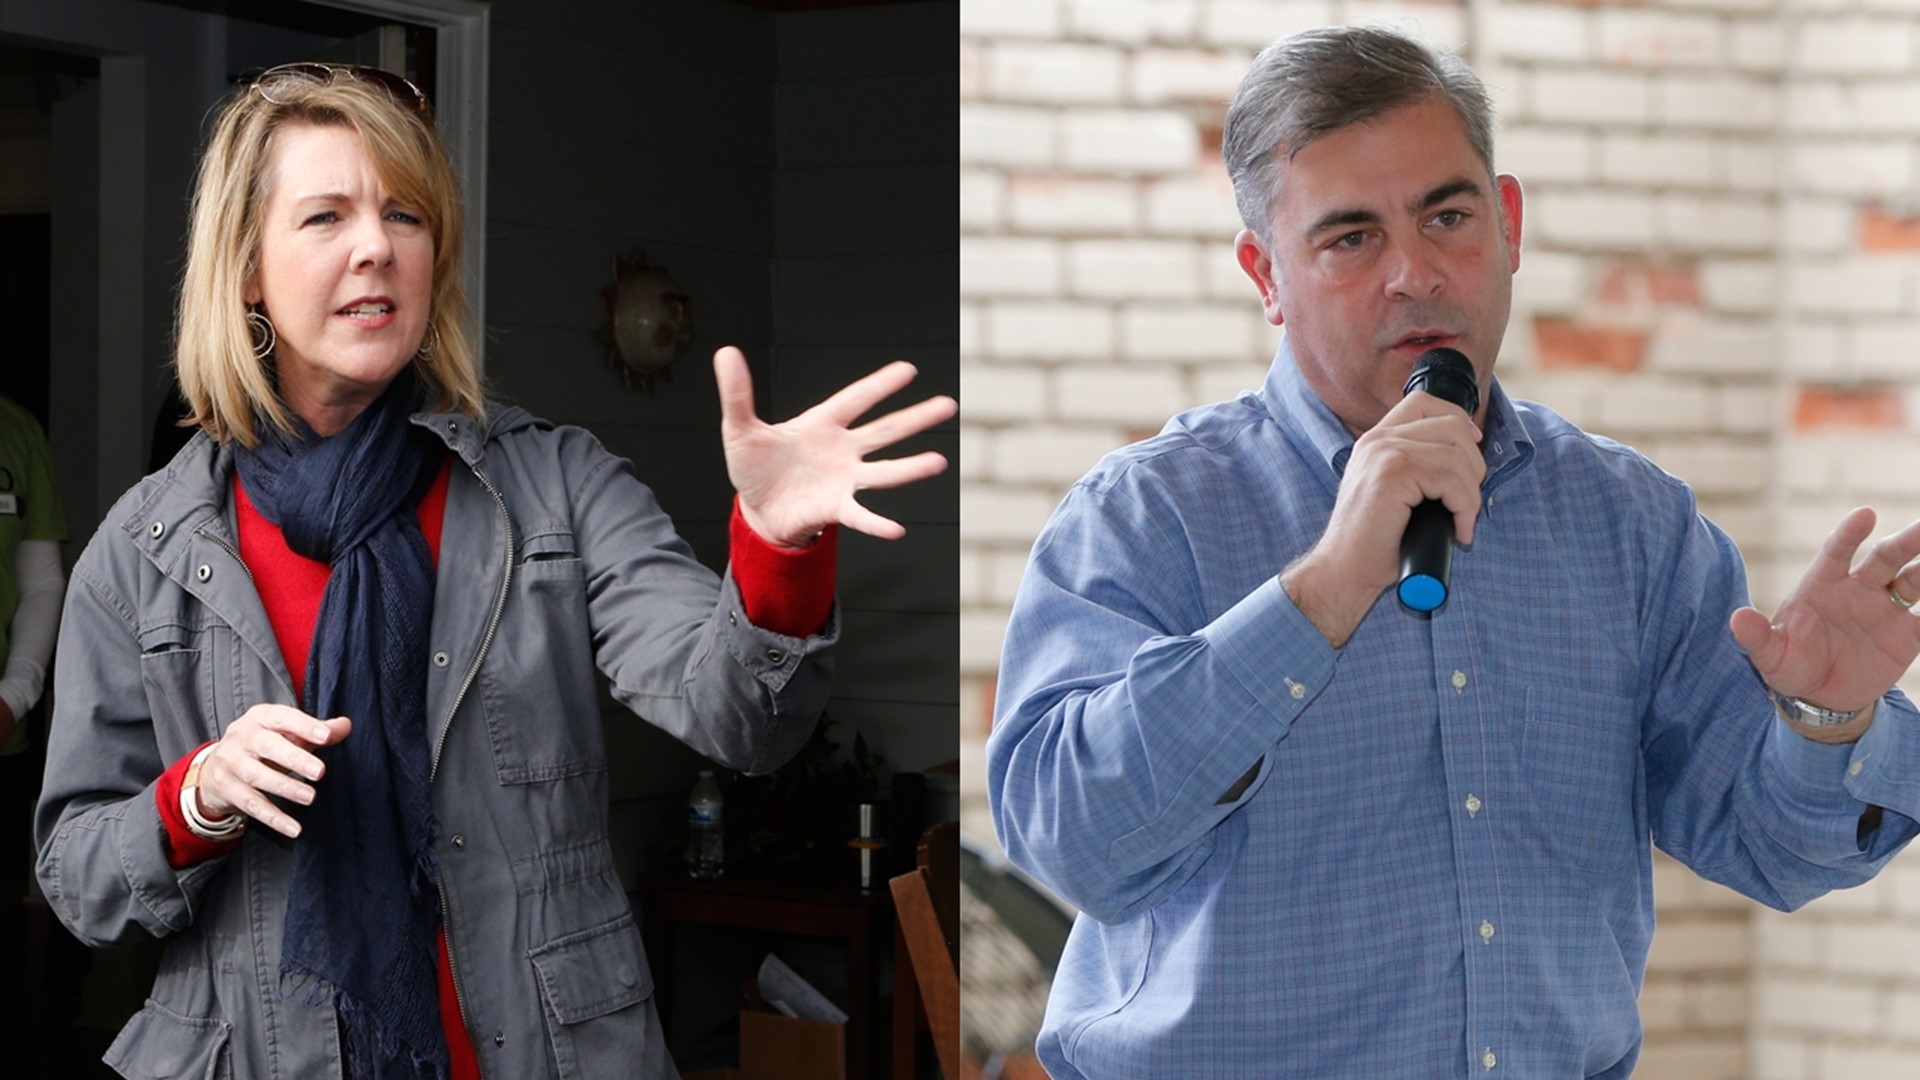 On Tuesday, voters will choose between self-proclaimed political outsider Republican Mike Carey and Democrat Allison Russo.